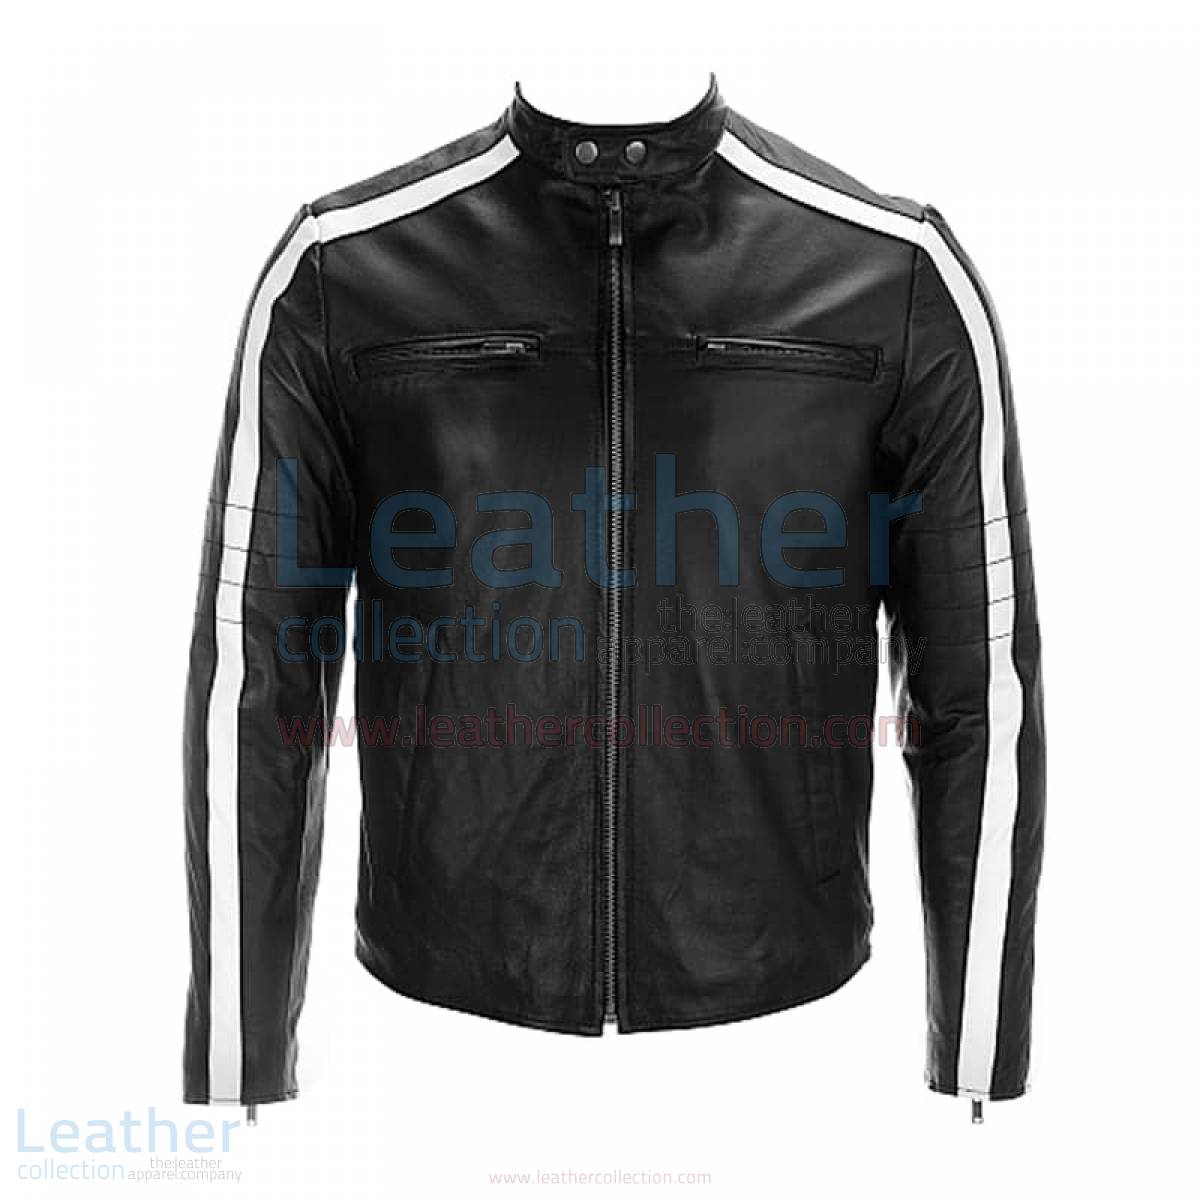 Semi Moto Leather Jacket With Stripes on Sleeves